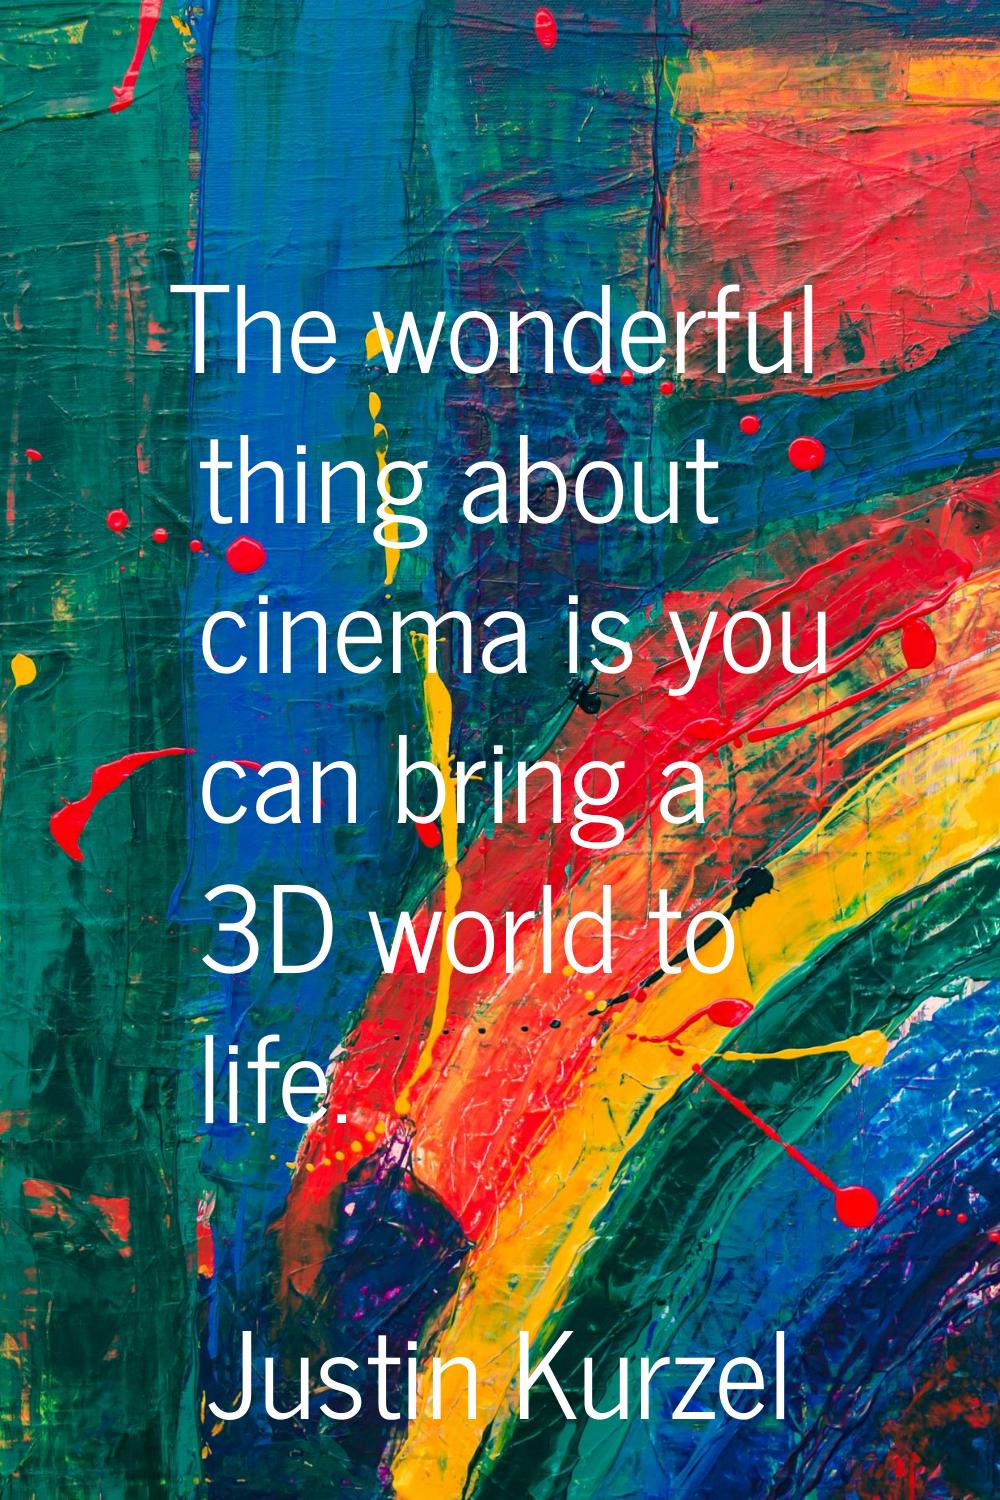 The wonderful thing about cinema is you can bring a 3D world to life.